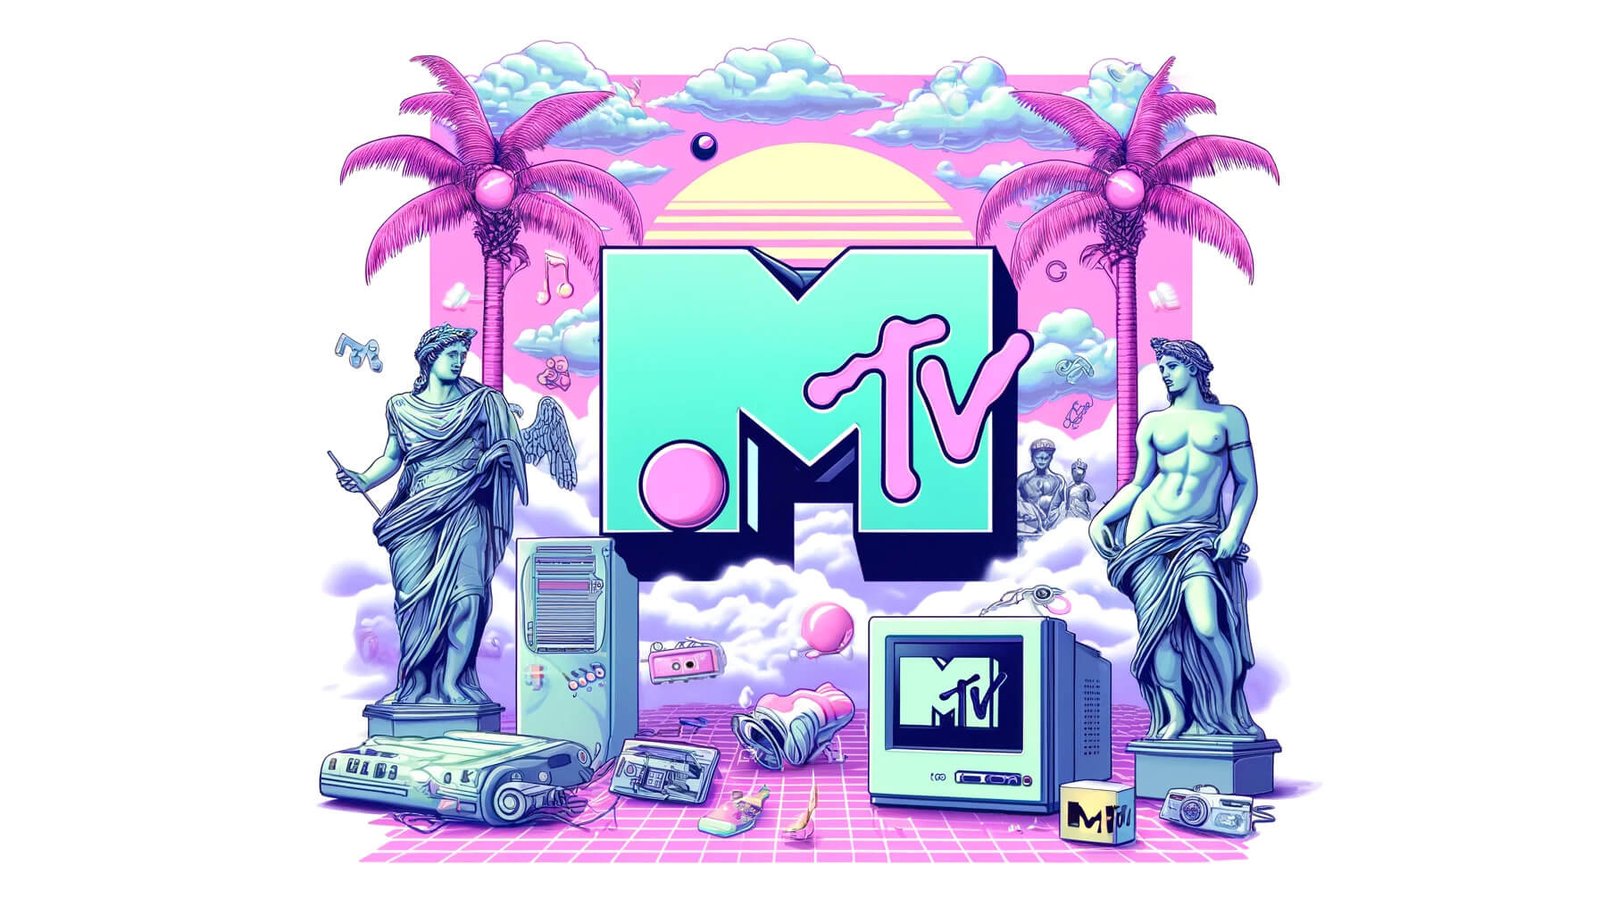 Iconic symbols from MTV (such as the MTV logo, music notes, and video cameras) integrated into a classic Vaporwave scene with Roman statues, old computer icons, and digital palm trees. illustration style